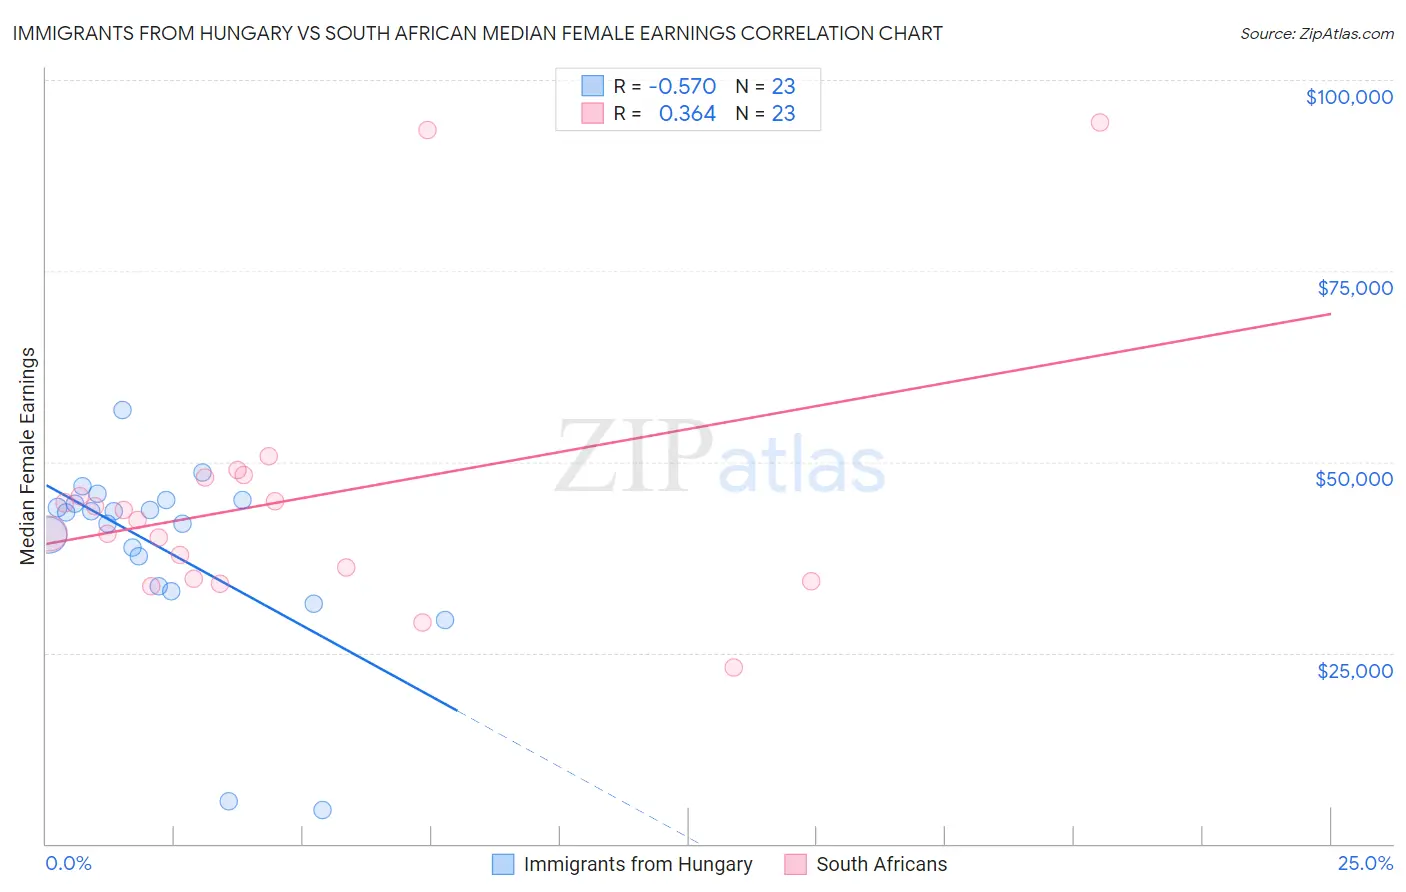 Immigrants from Hungary vs South African Median Female Earnings